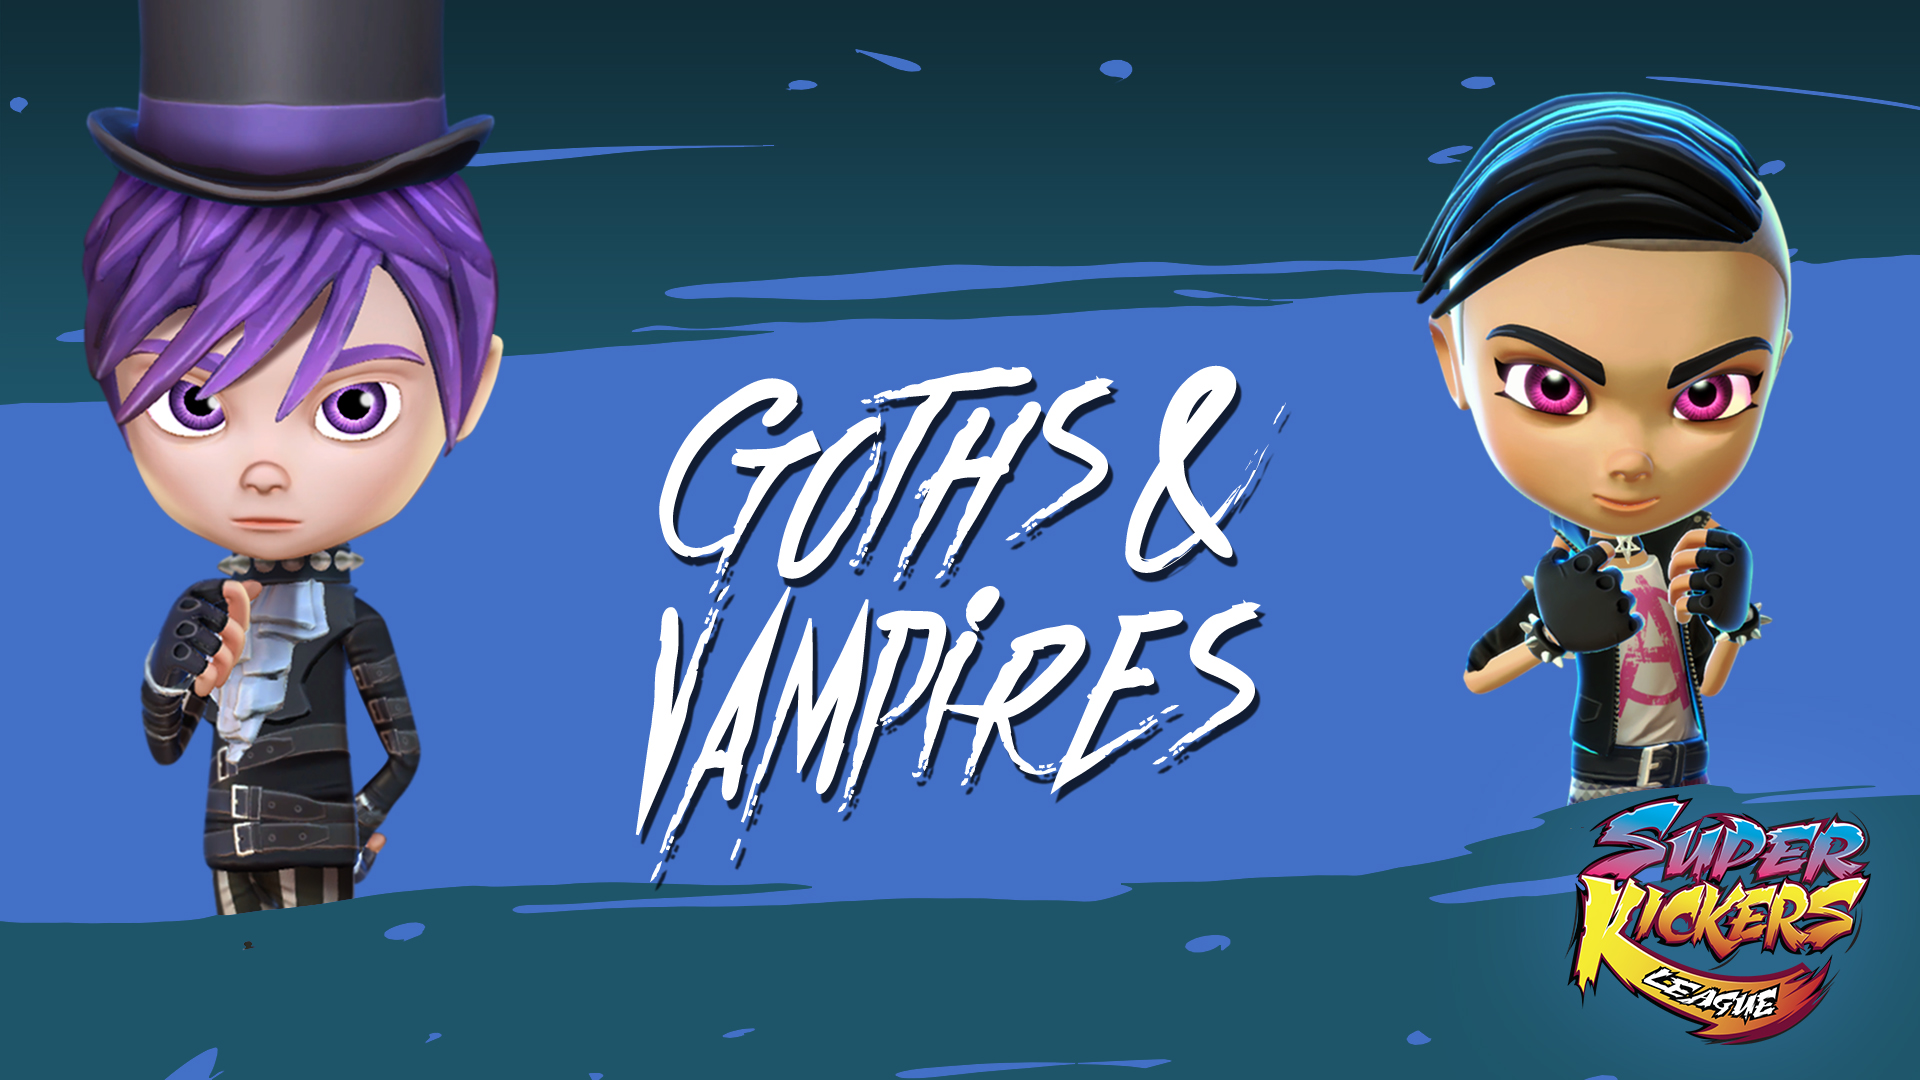 Super Kickers League: Goths and Vampires!